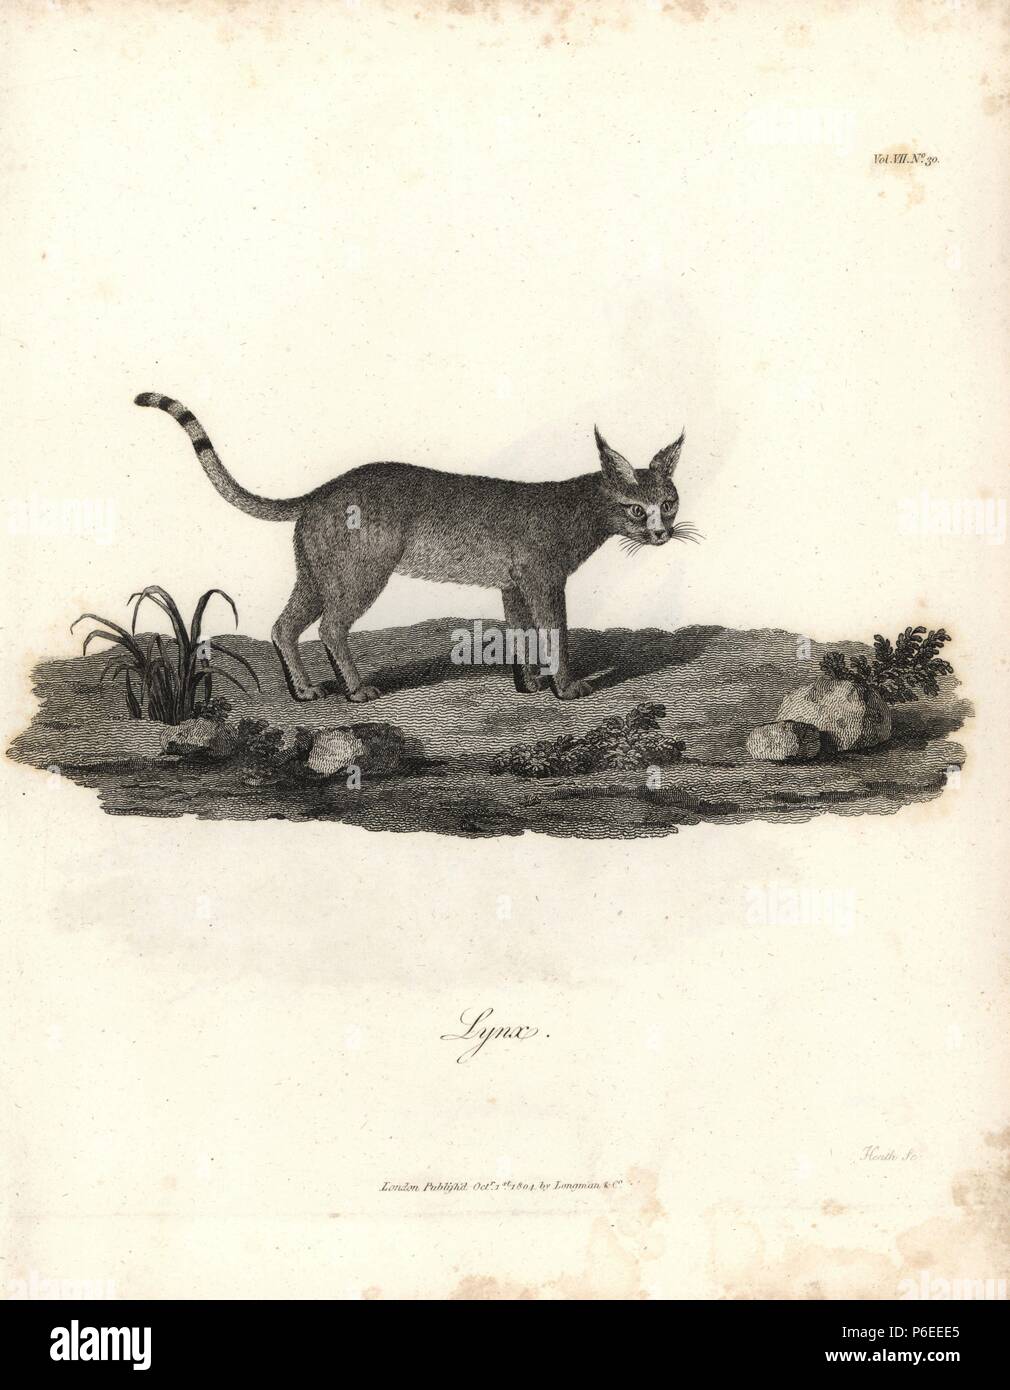 Booted lynx or African wildcat, Felis silvestris lybica. Copperplate engraving from James Bruce's 'Travels to Discover the Source of the Nile, in the years 1768, 1769, 1770, 1771, 1772 and 1773,' London, 1790. James Bruce (1730-1794) was a Scottish explorer and travel writer who spent more than 12 years in North Africa and Ethiopia. Engraved by Heath after an original drawing by Bruce. Stock Photo